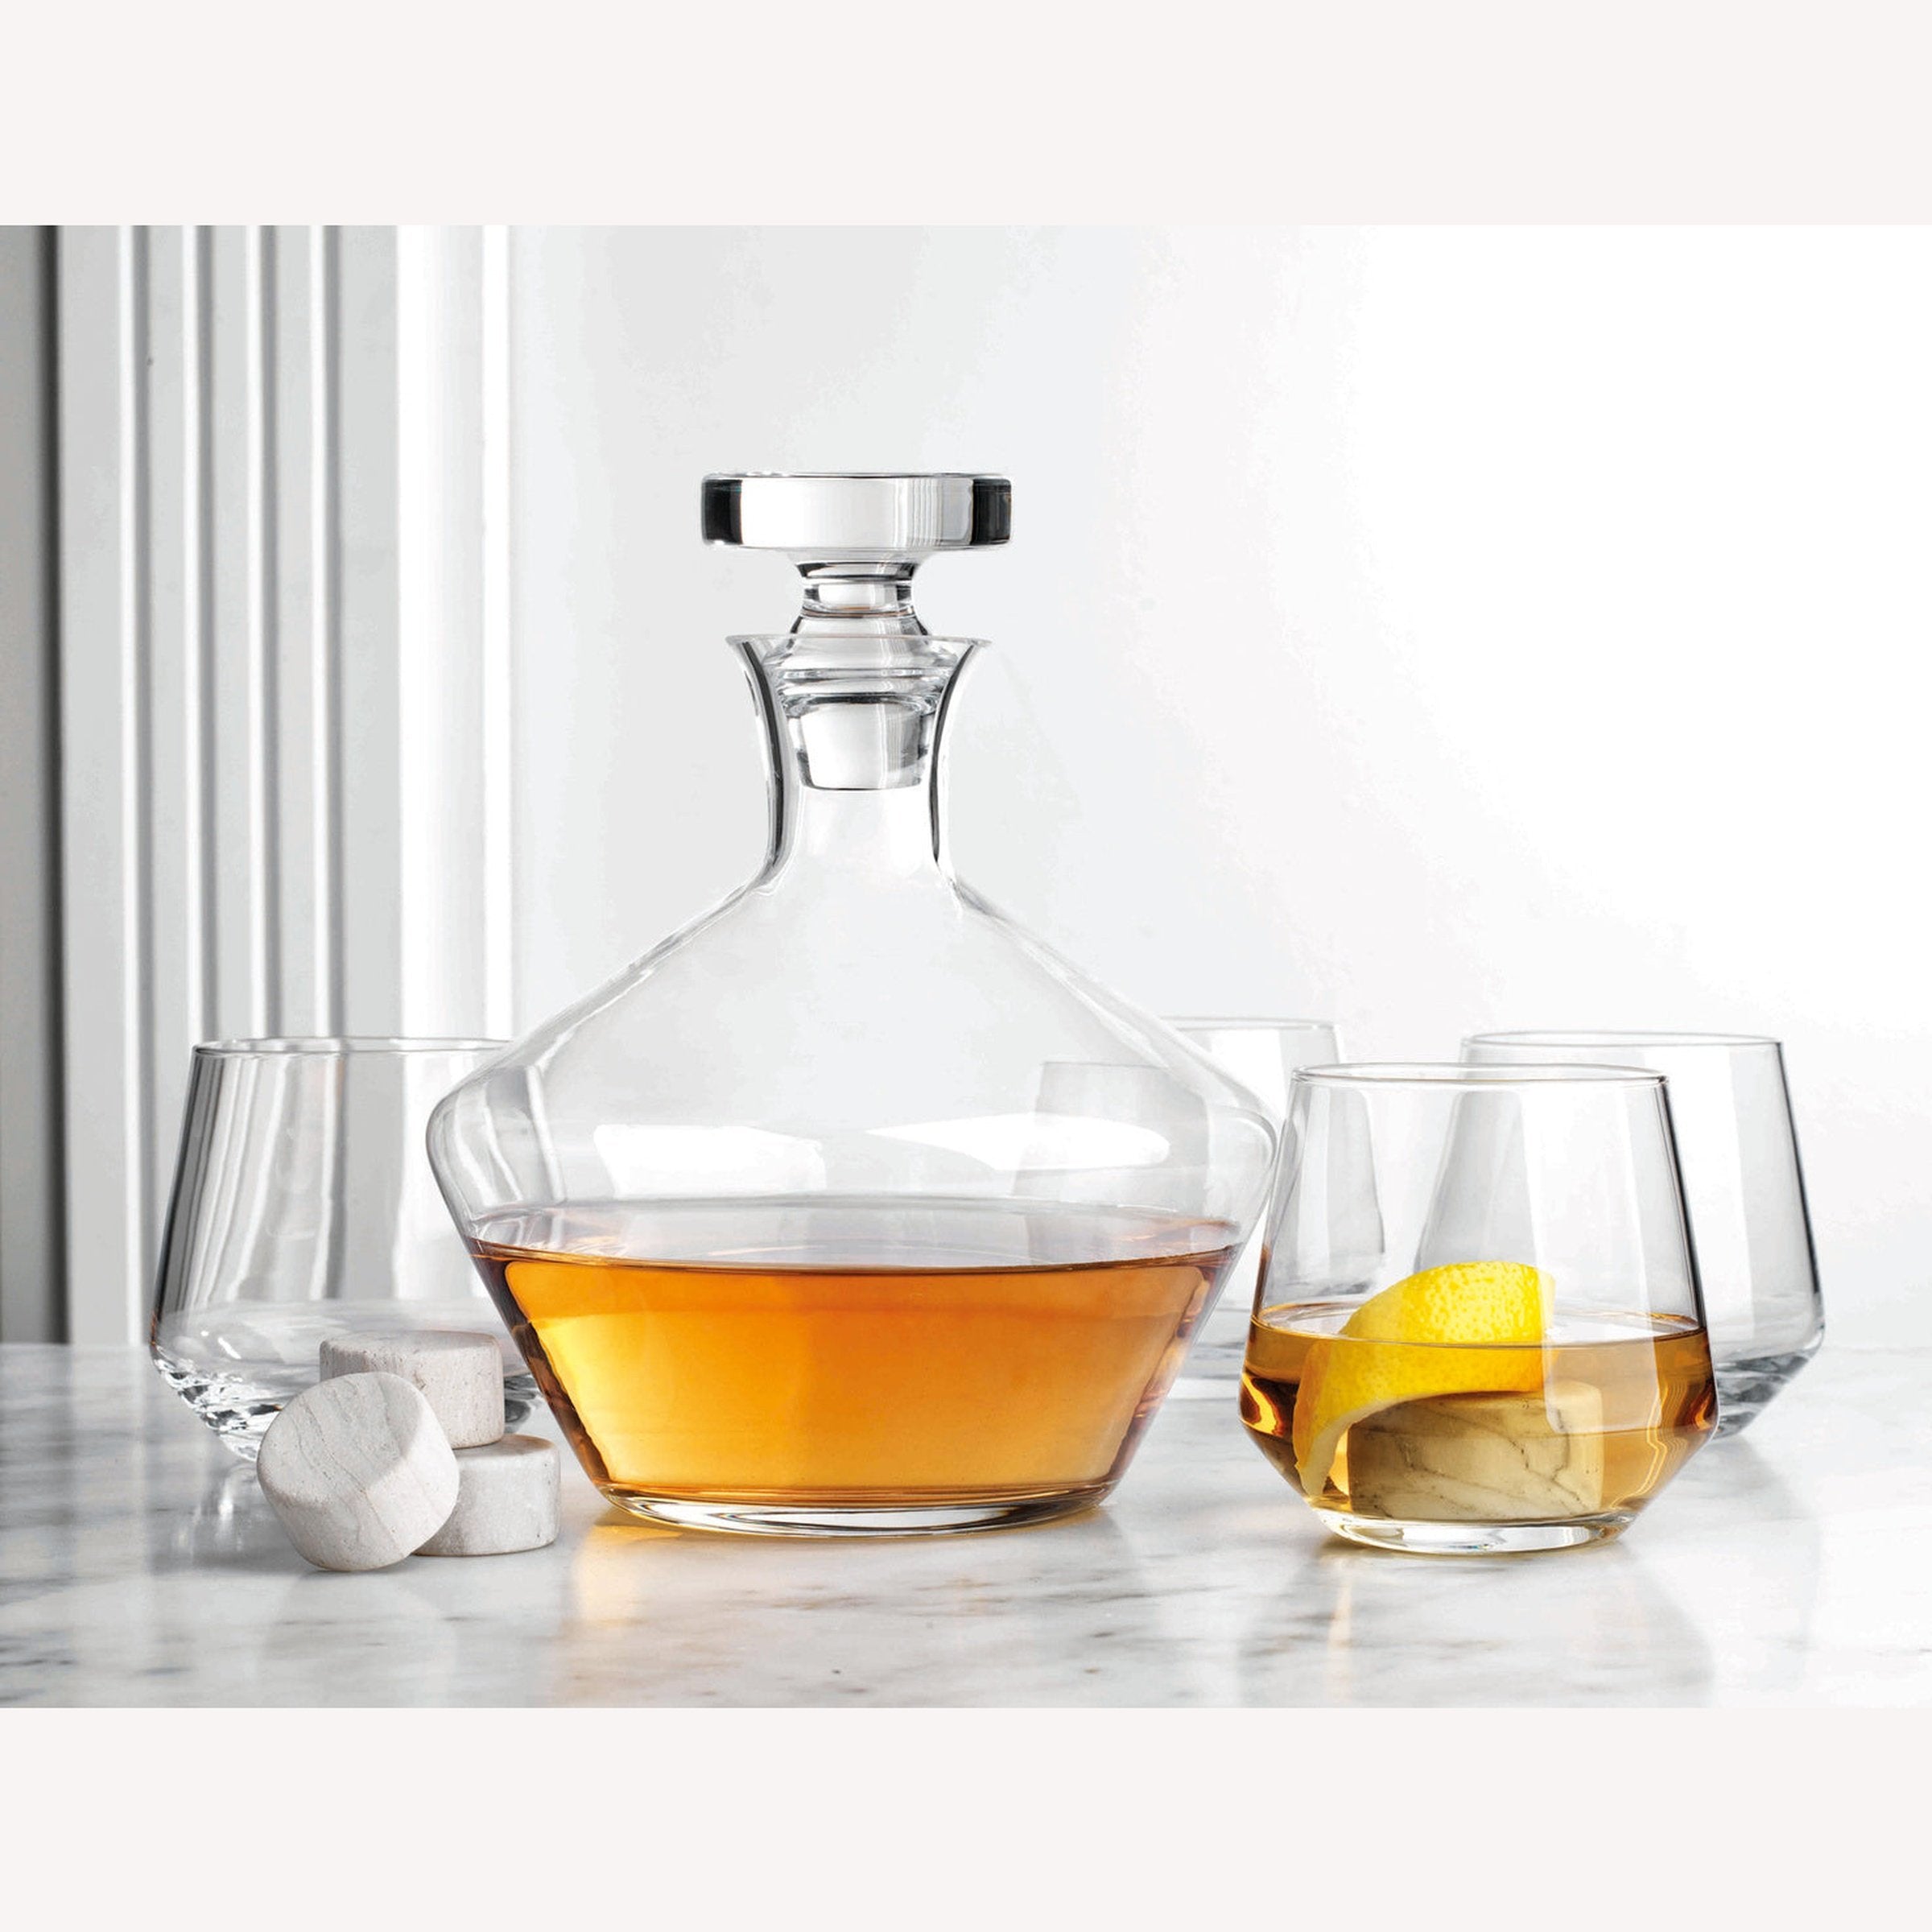 Marmont Whiskey Decanter